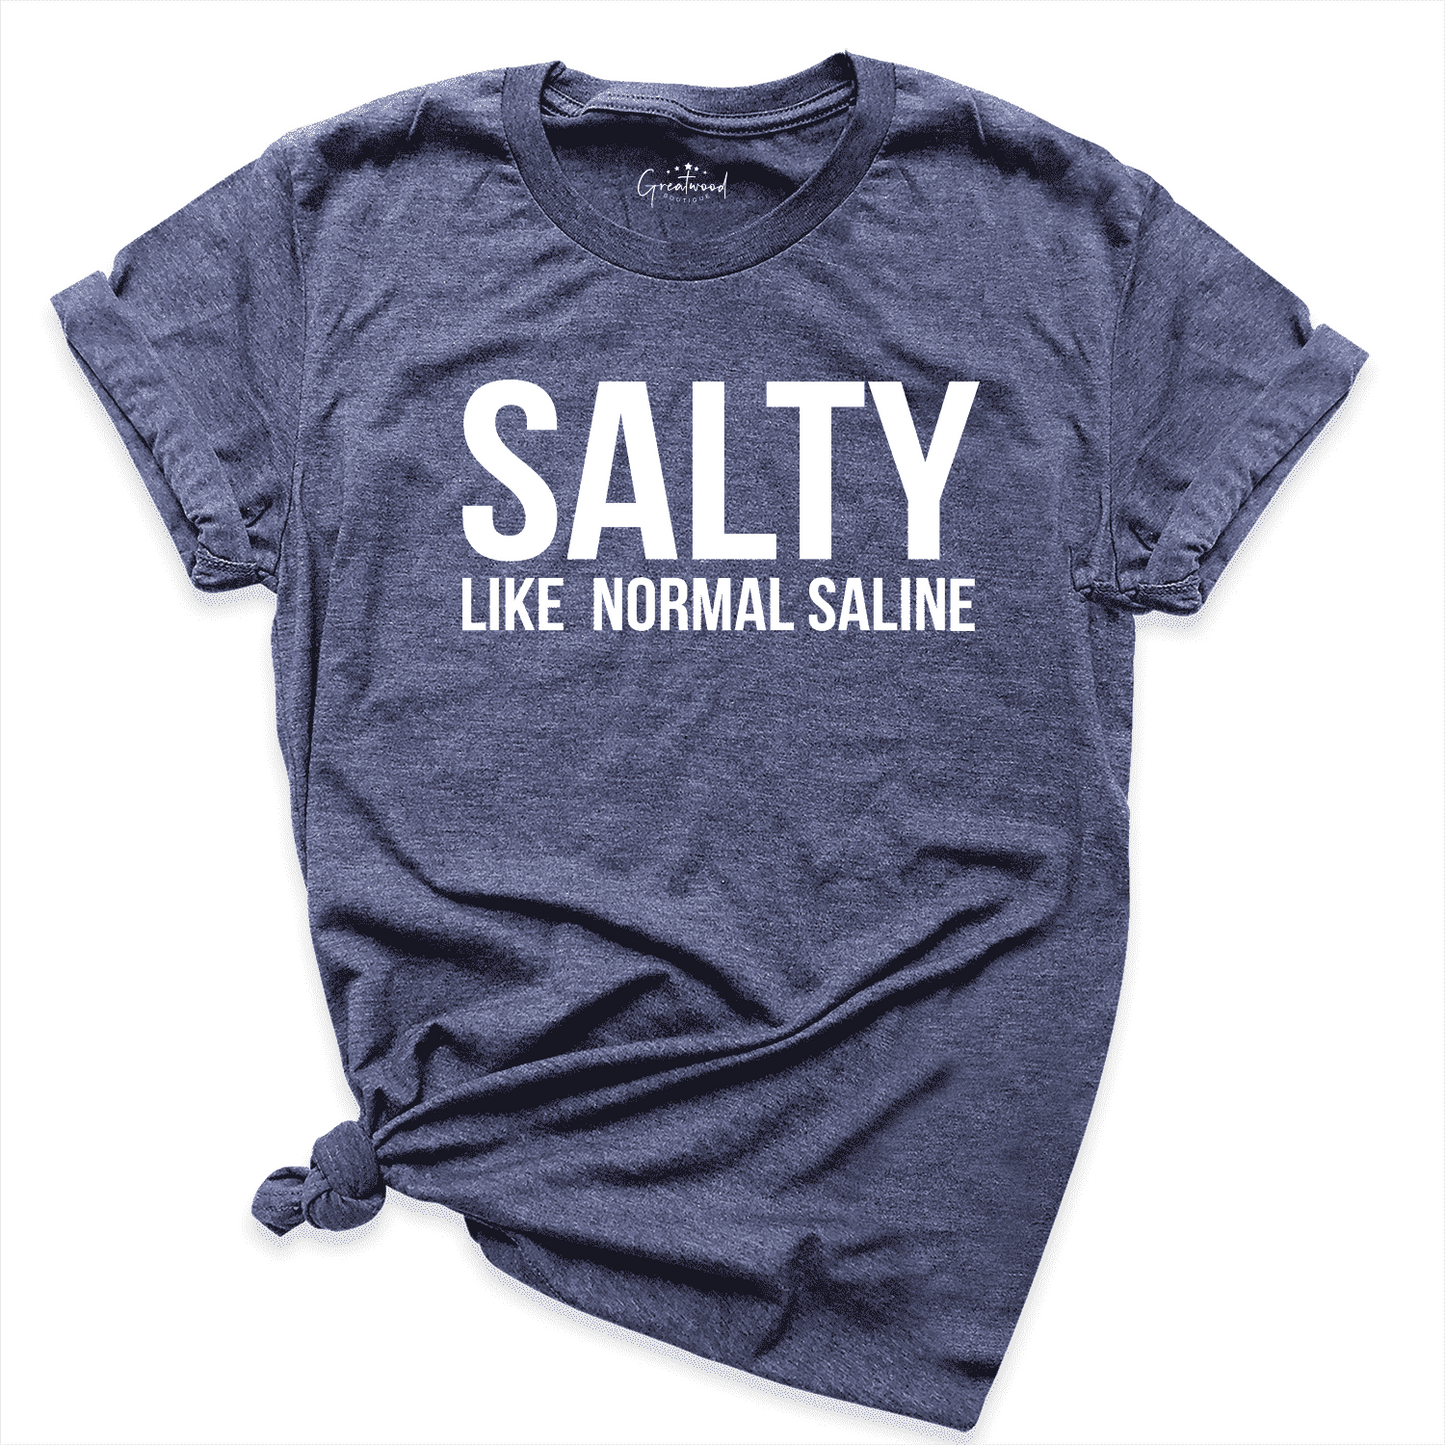 Salty Like Normal Saline Shirt Navy - Greatwood Boutique.